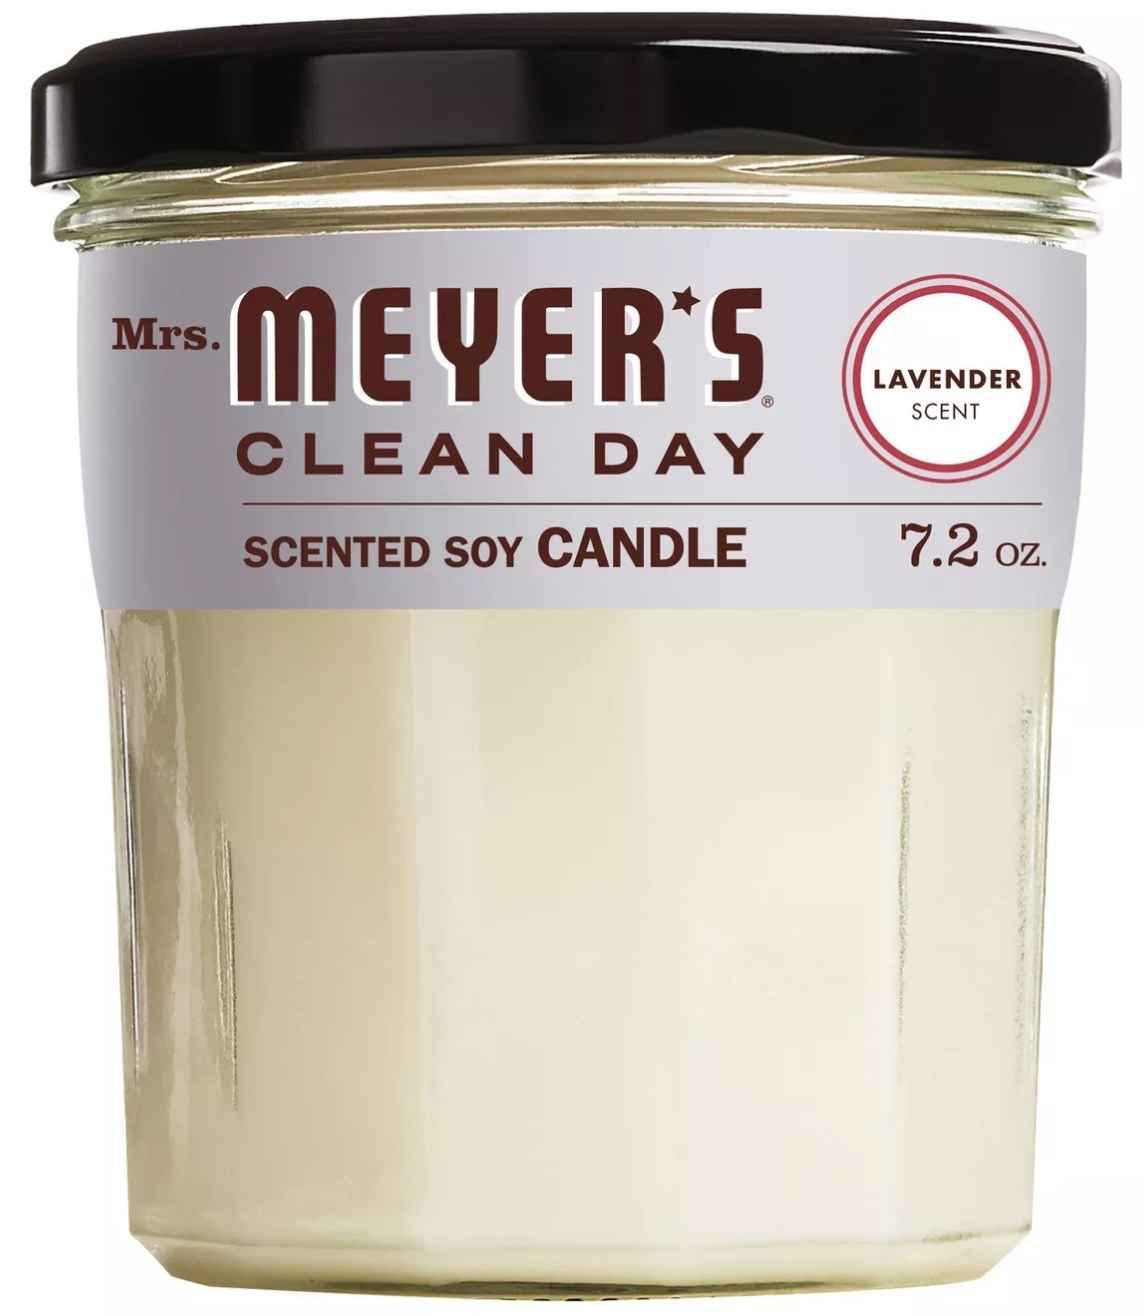 The candle in 7.2-ounce size